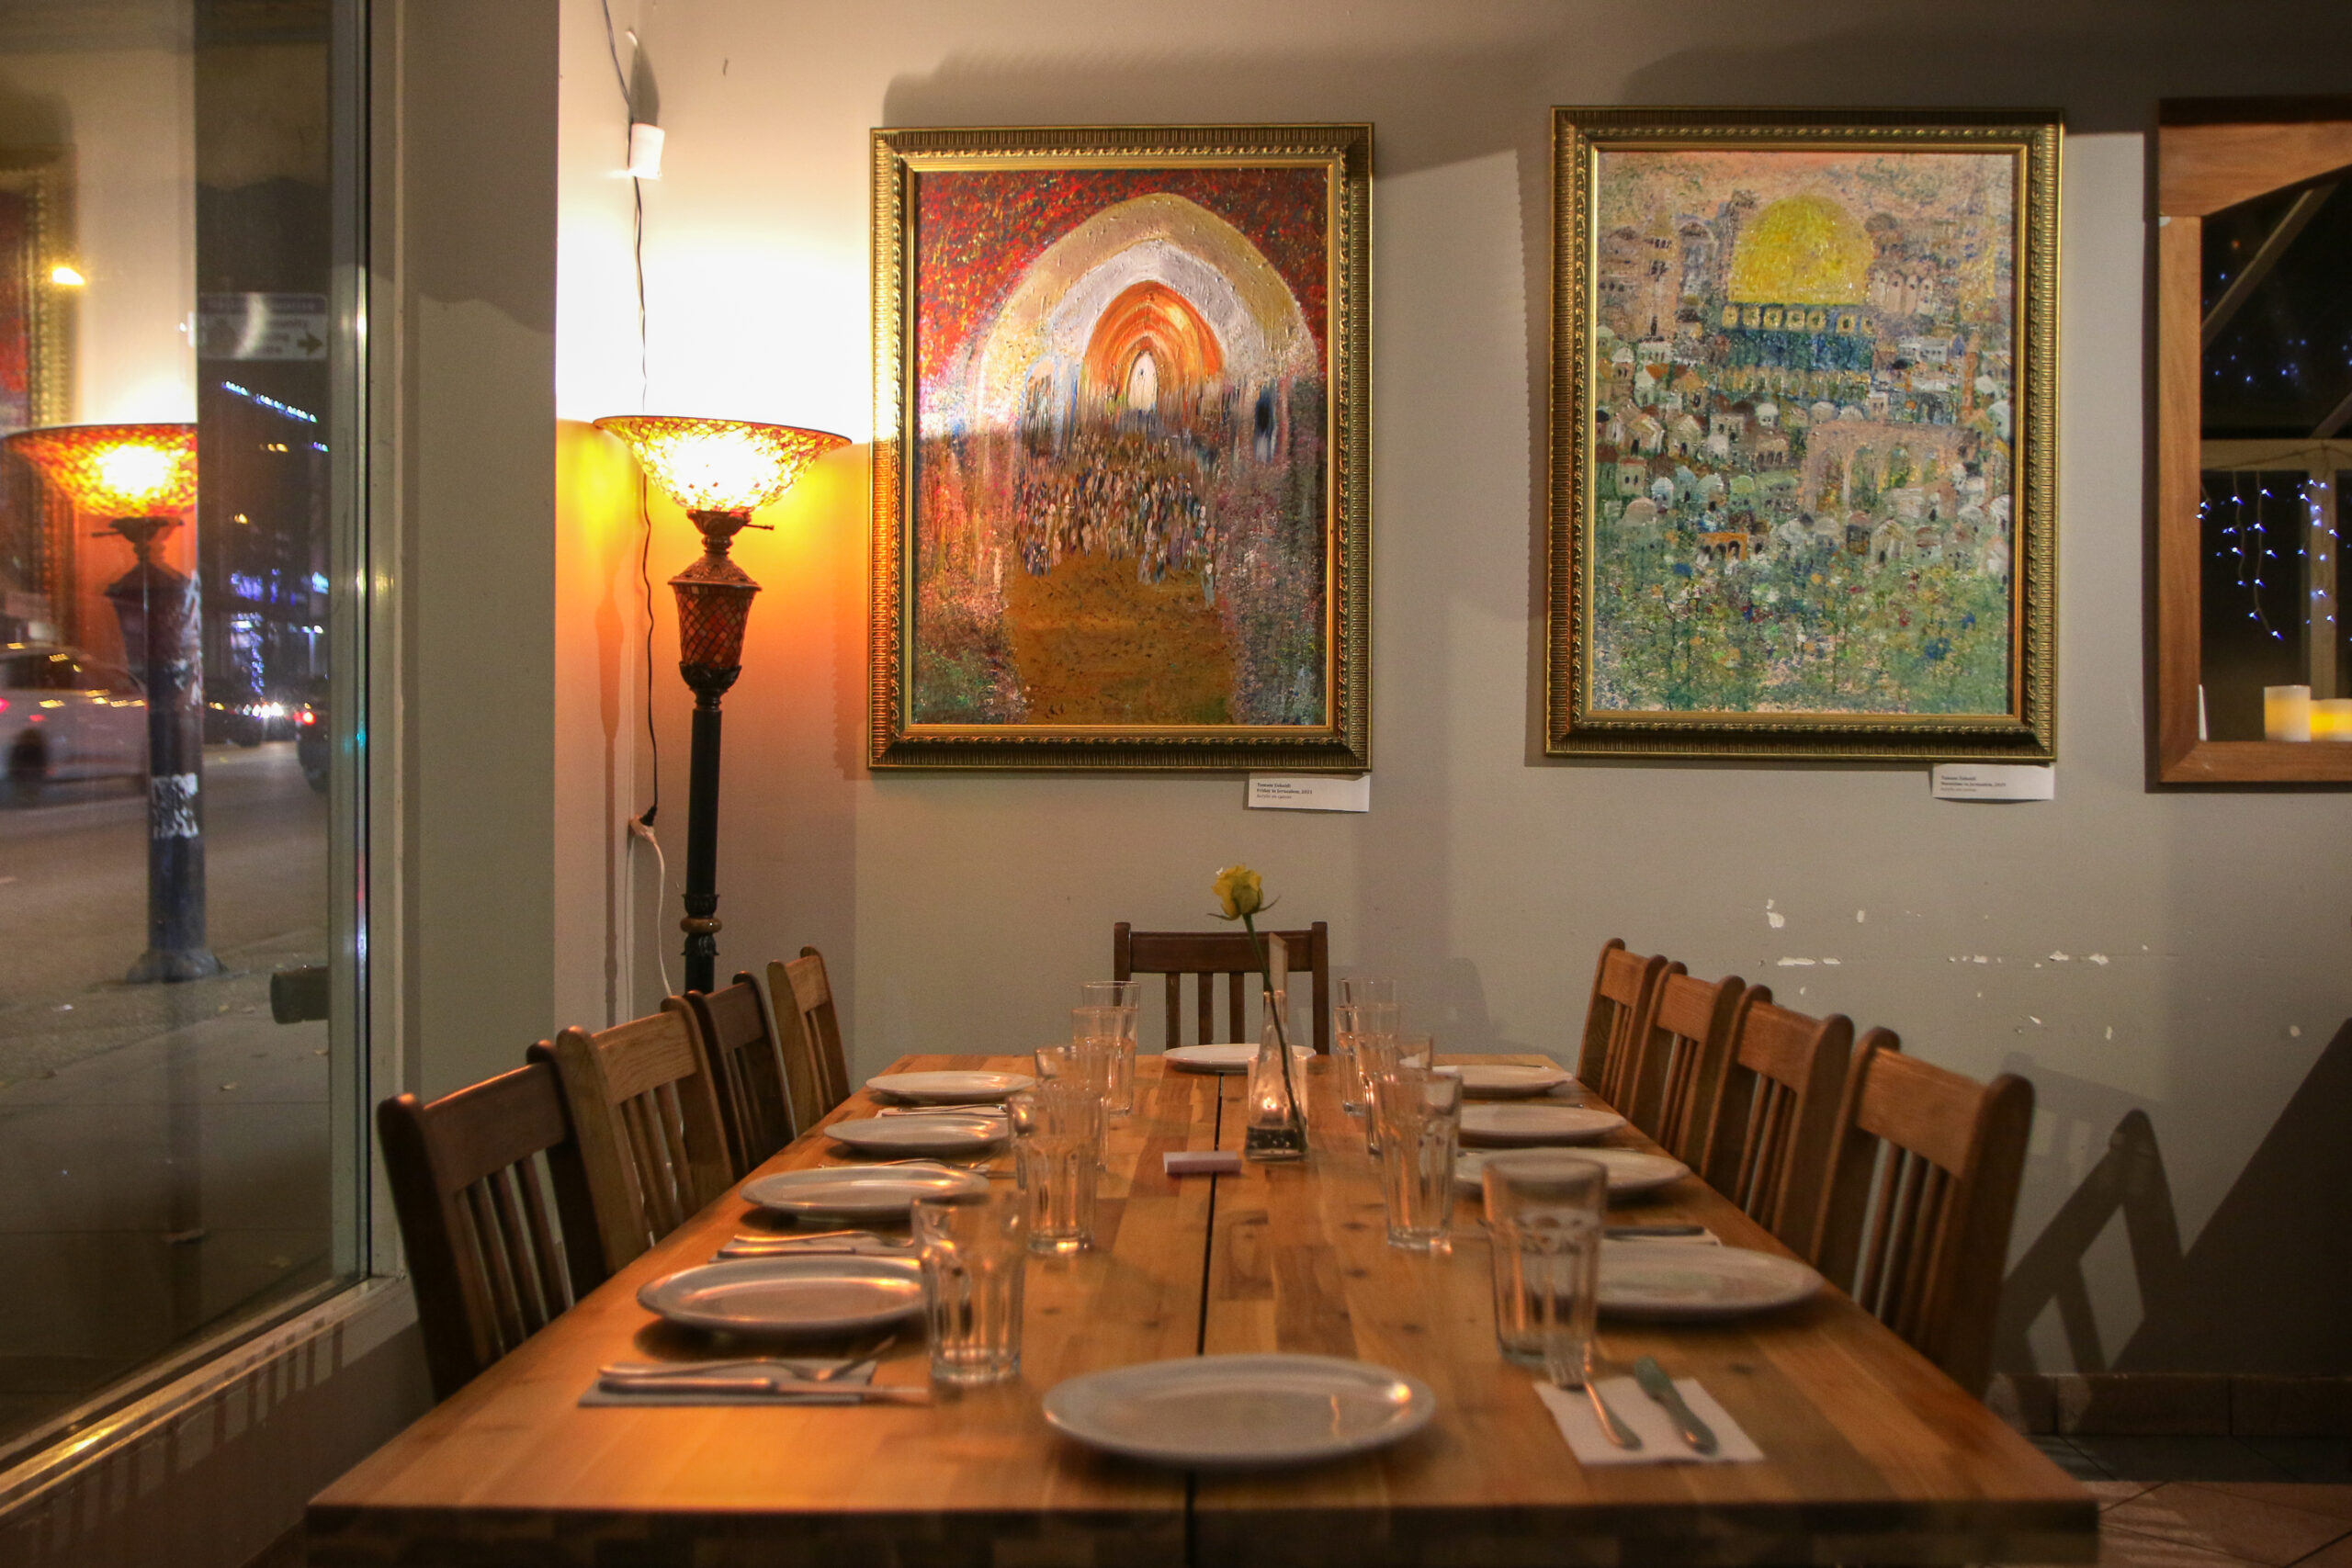 A long wooden table set with empty dishes in front of a moody amber light and acrylic paintings with golden frames on the wall. The window outside shows it is dark out.